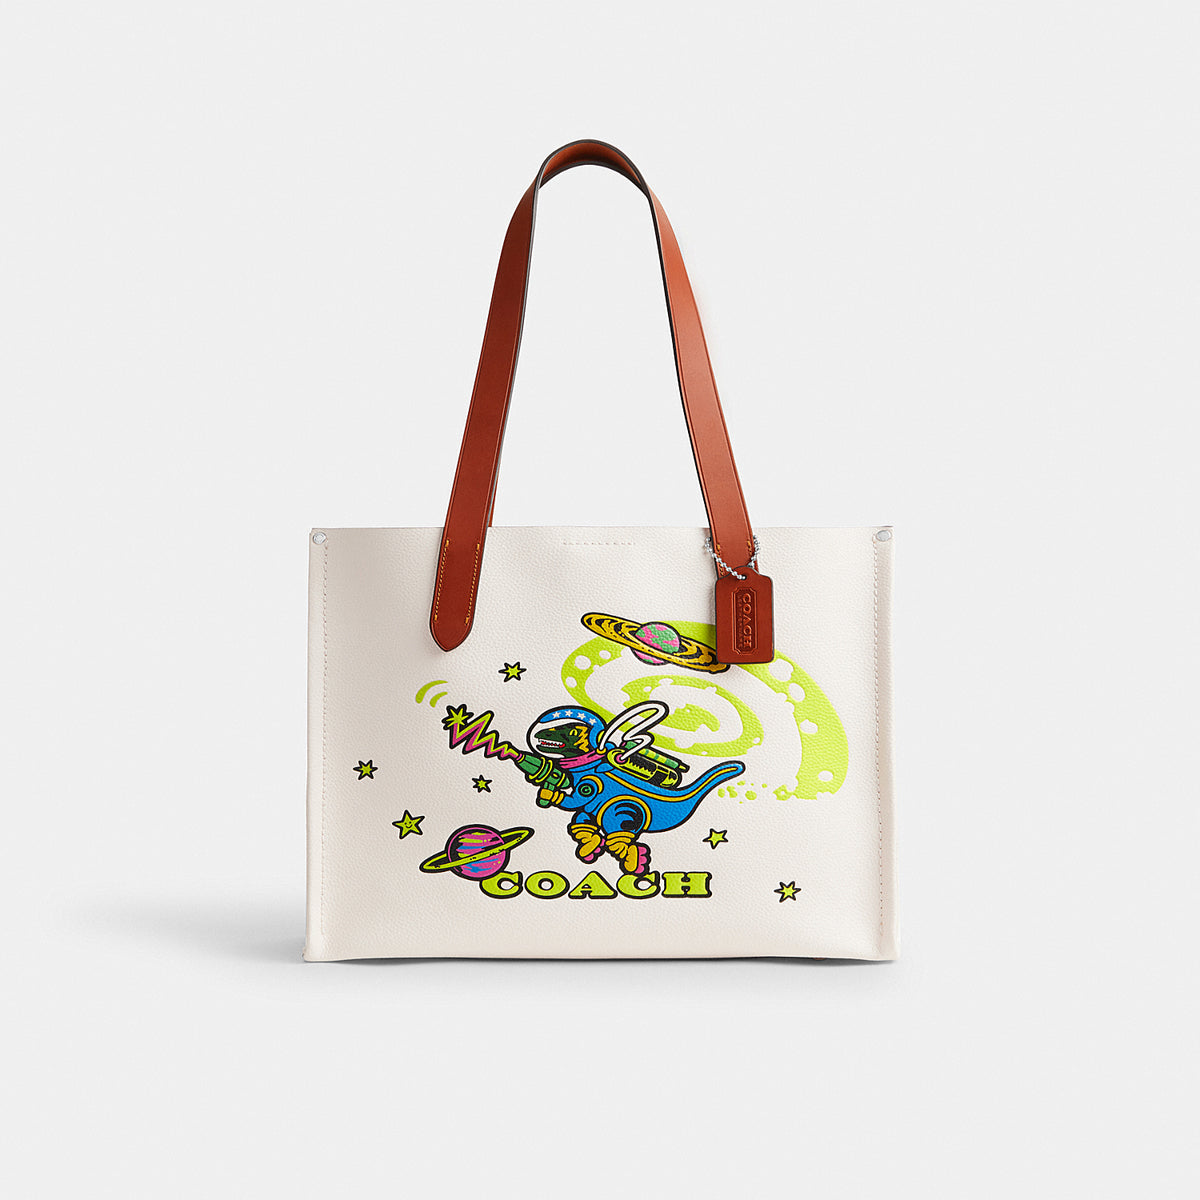 Cosmic Coach Relay Tote 34 in Pebble Leather with Rexy Graphic